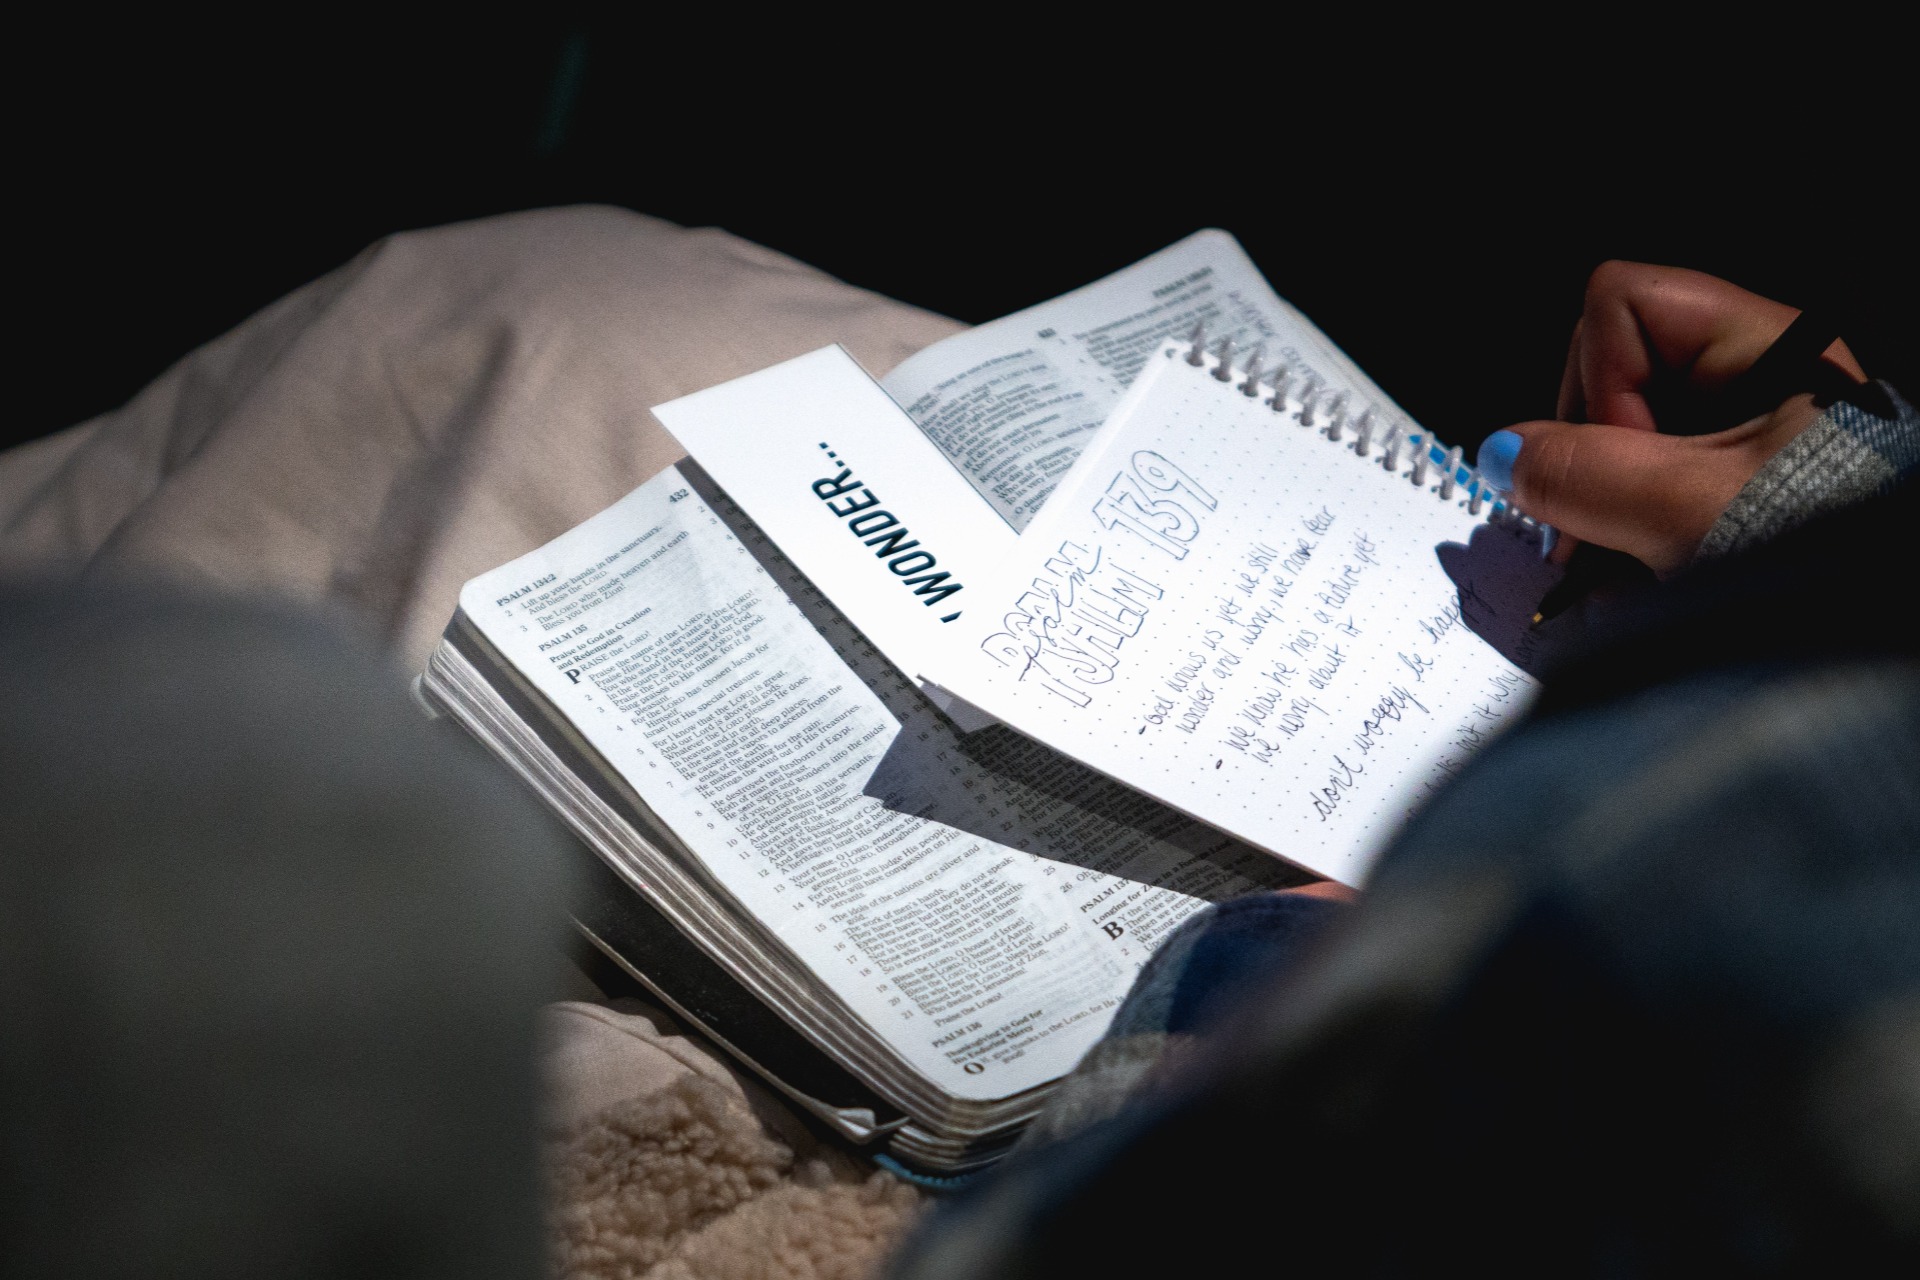 Someone writes notes on a pad on an open Bible